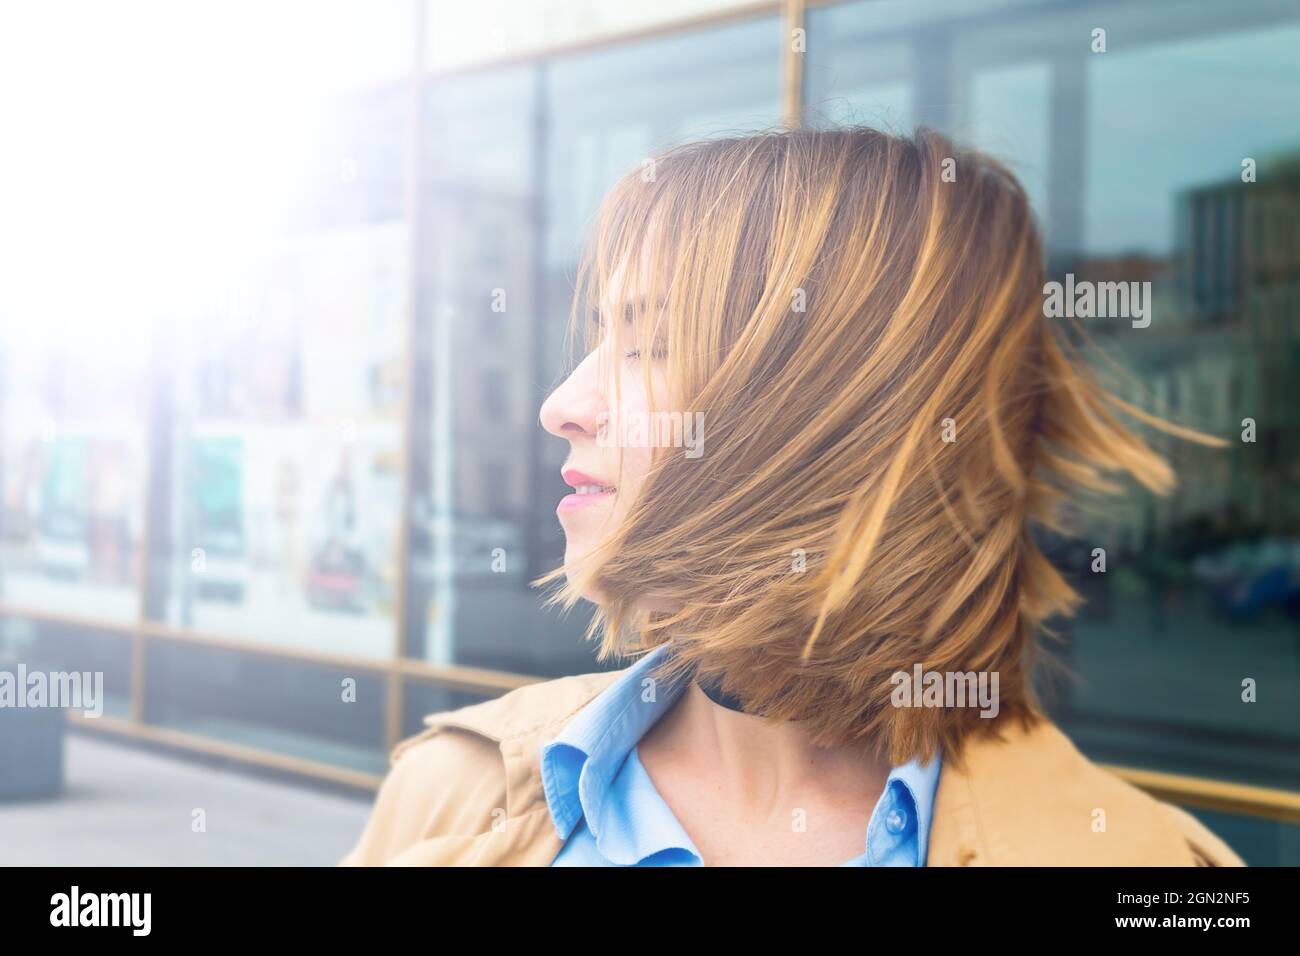 Woman with closed eyes smiling new day. Stock Photo